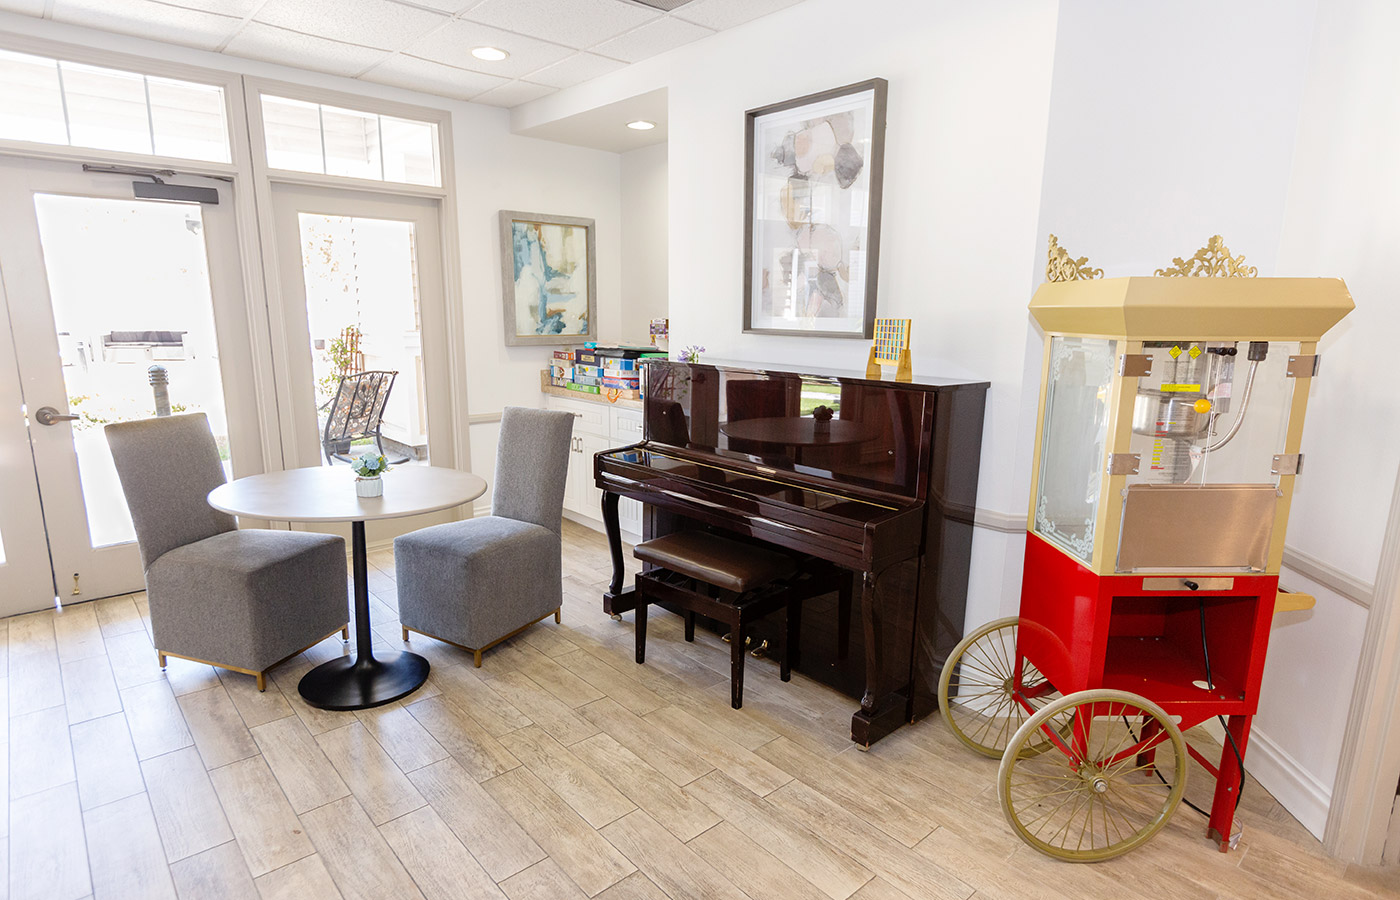 small dining table, piano and popcorn maker in bright room